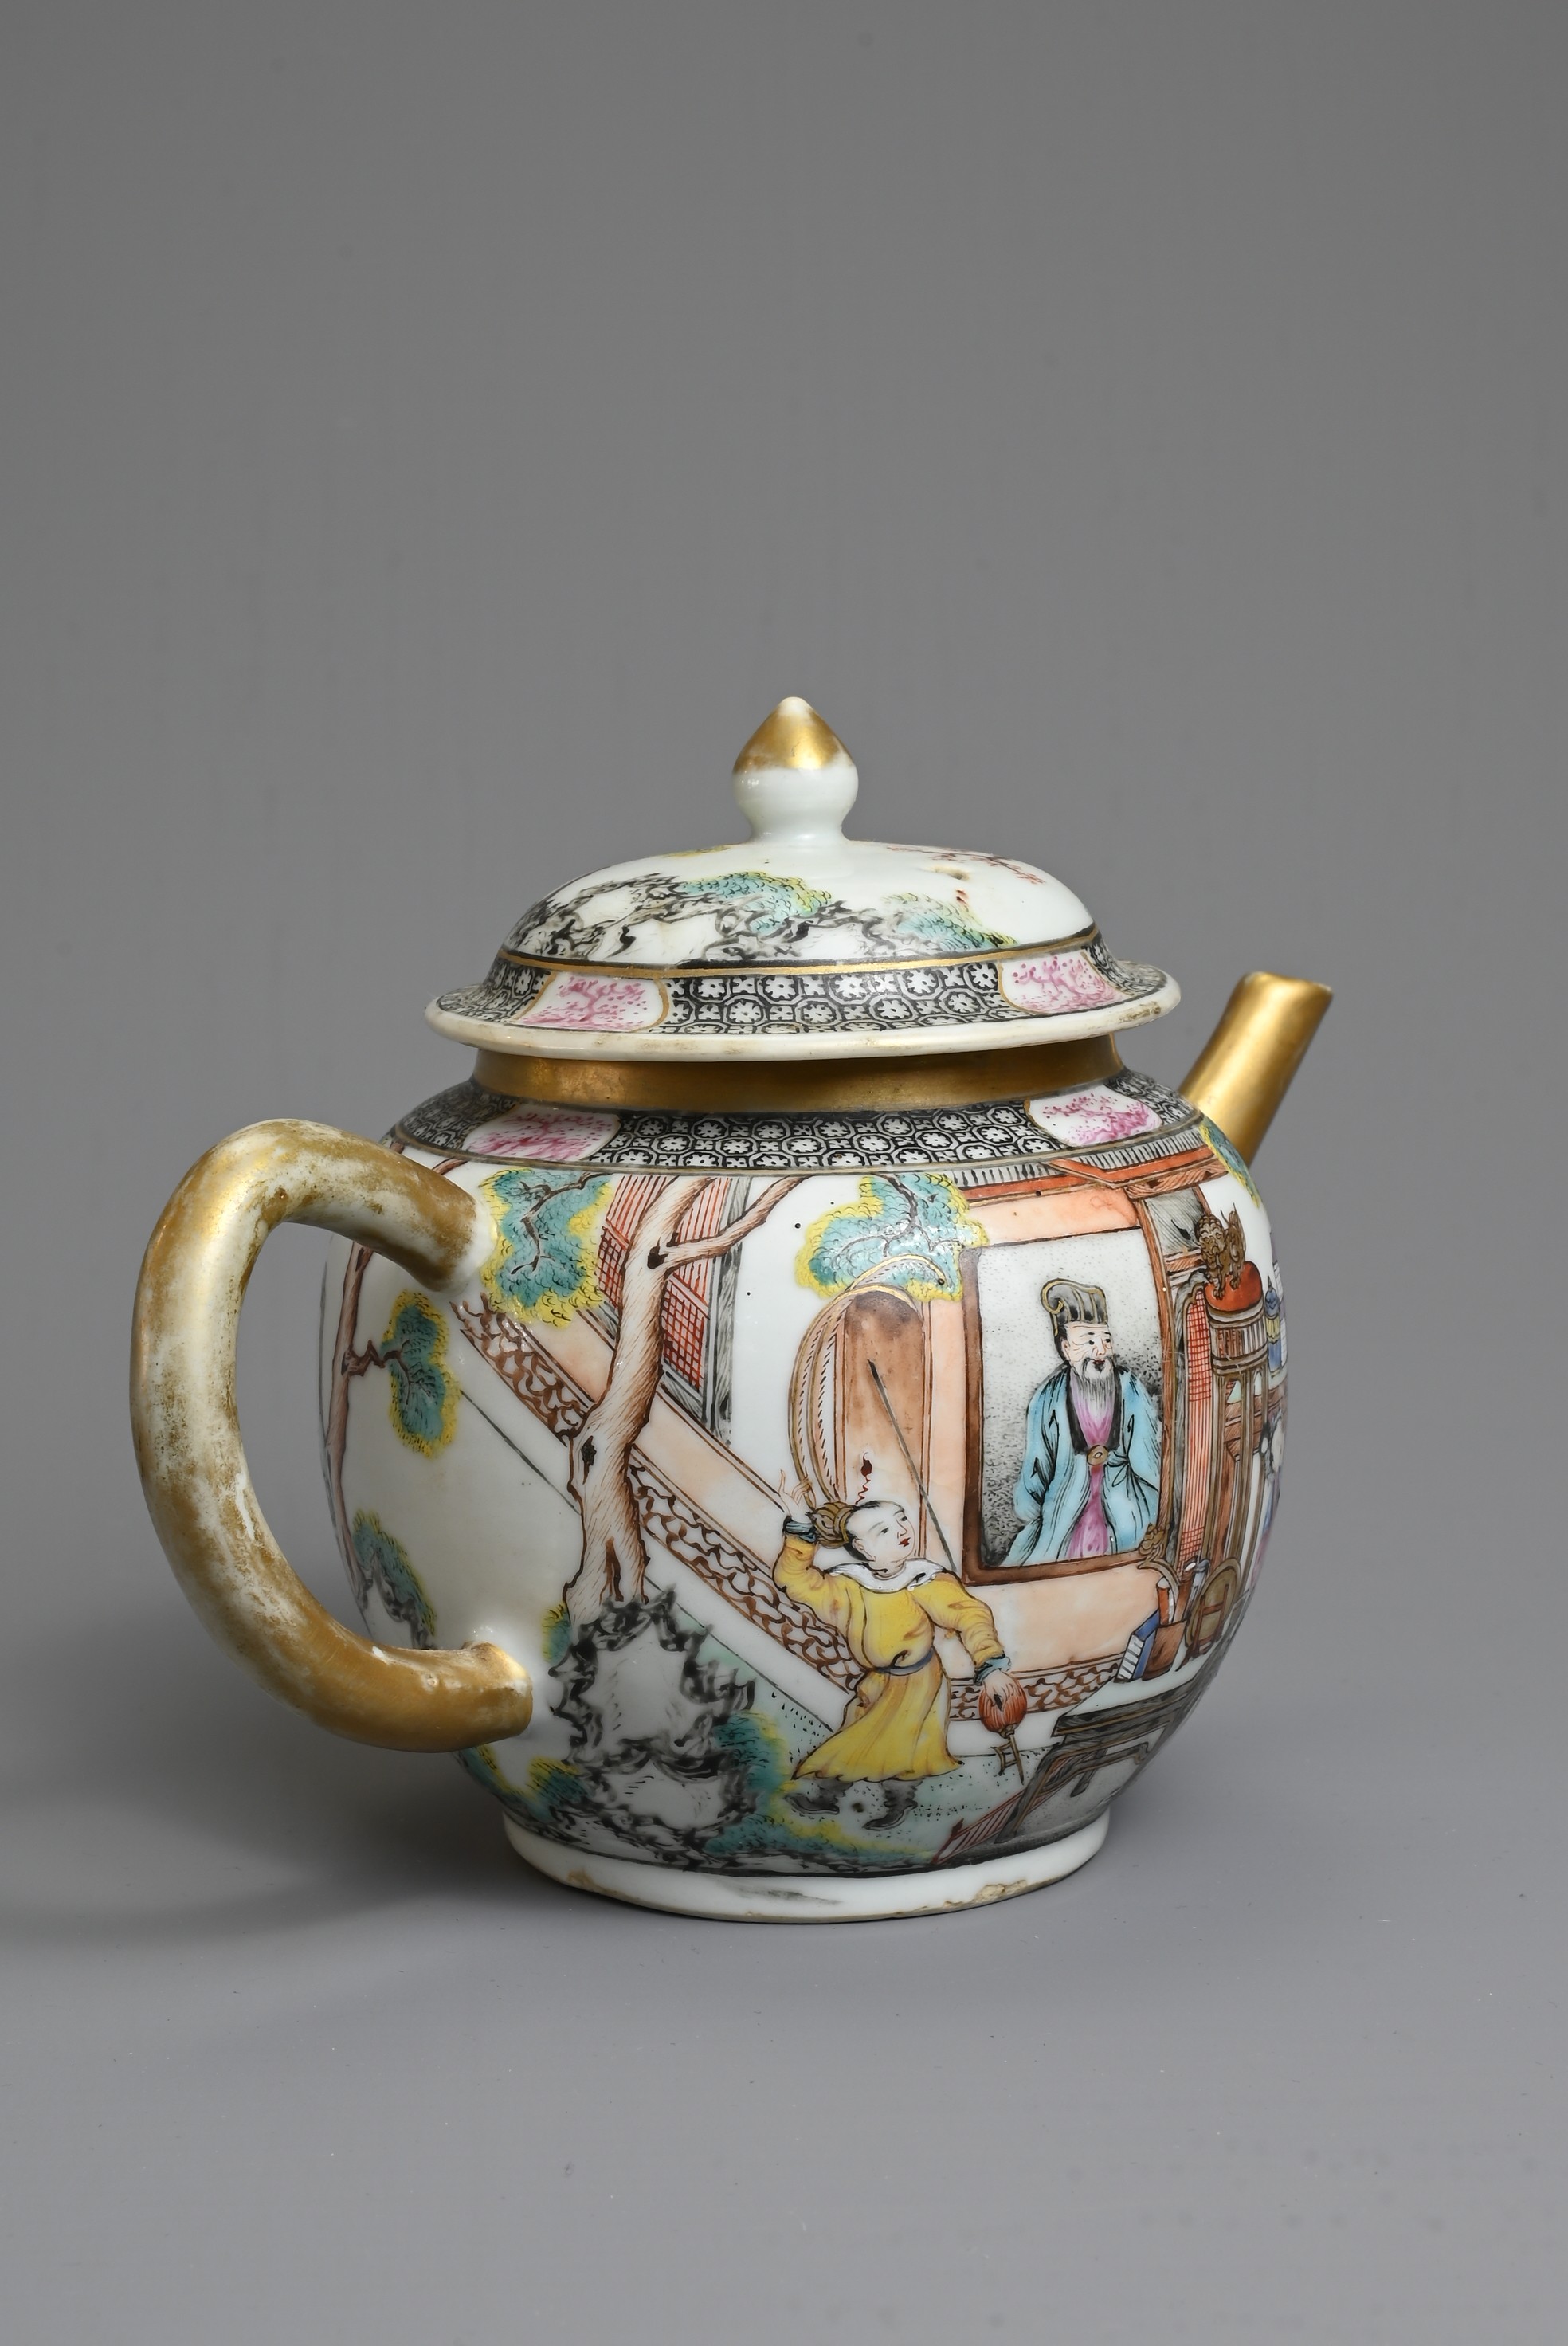 A FINE CHINESE FAMILLE ROSE PORCELAIN TEAPOT, 18TH CENTURY - Image 3 of 21